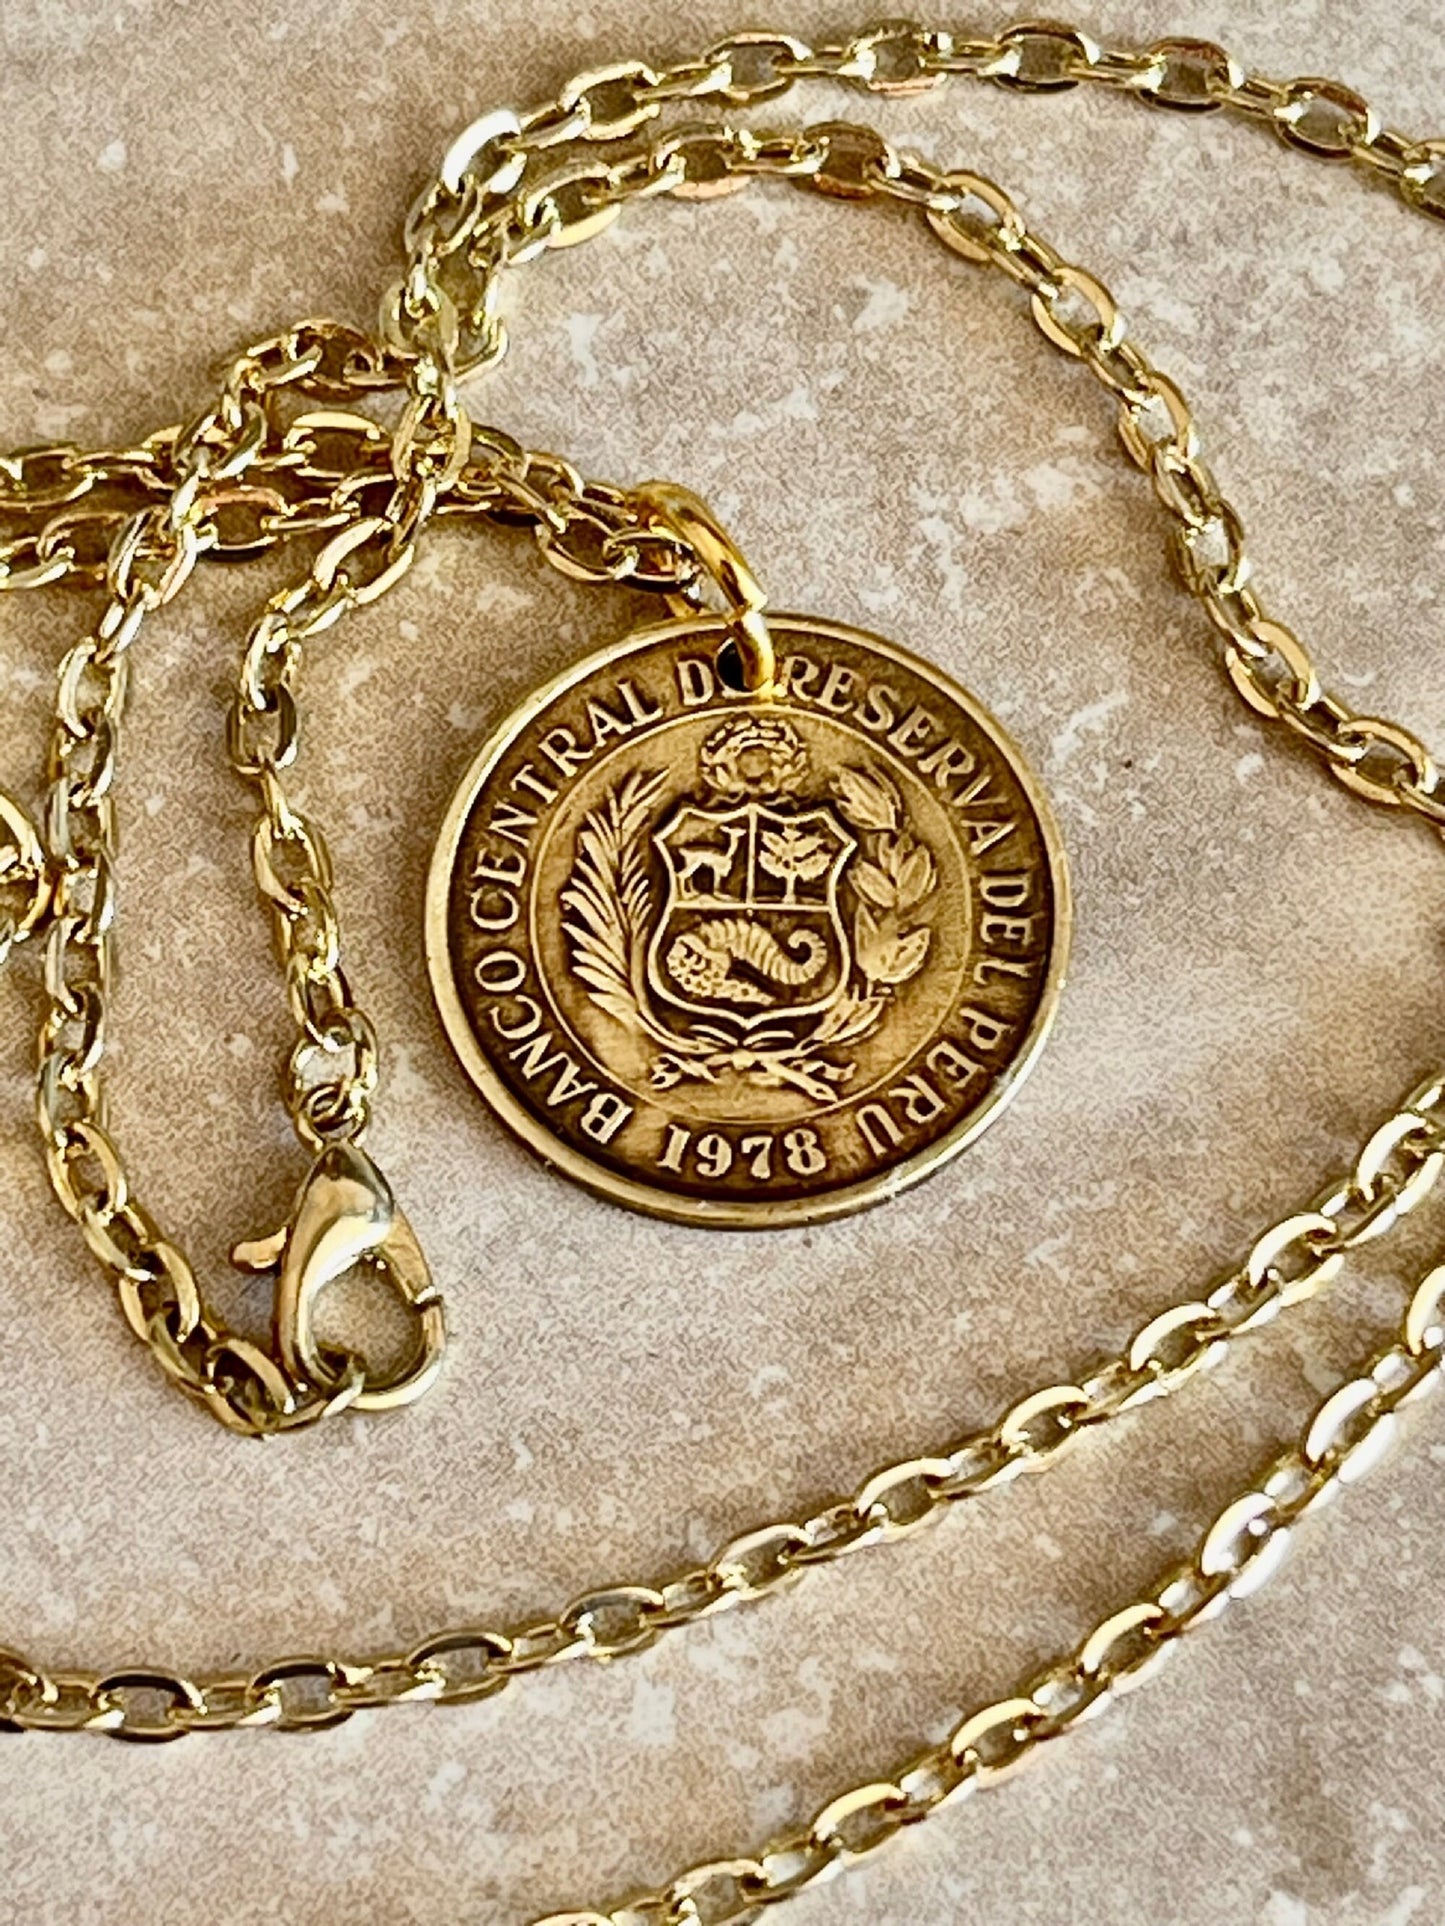 Peru Coin Pendant Necklace Peruvian 5 Sol De Oro Personal Necklace Old Handmade Jewelry Gift Friend Charm For Him Her World Coin Collector